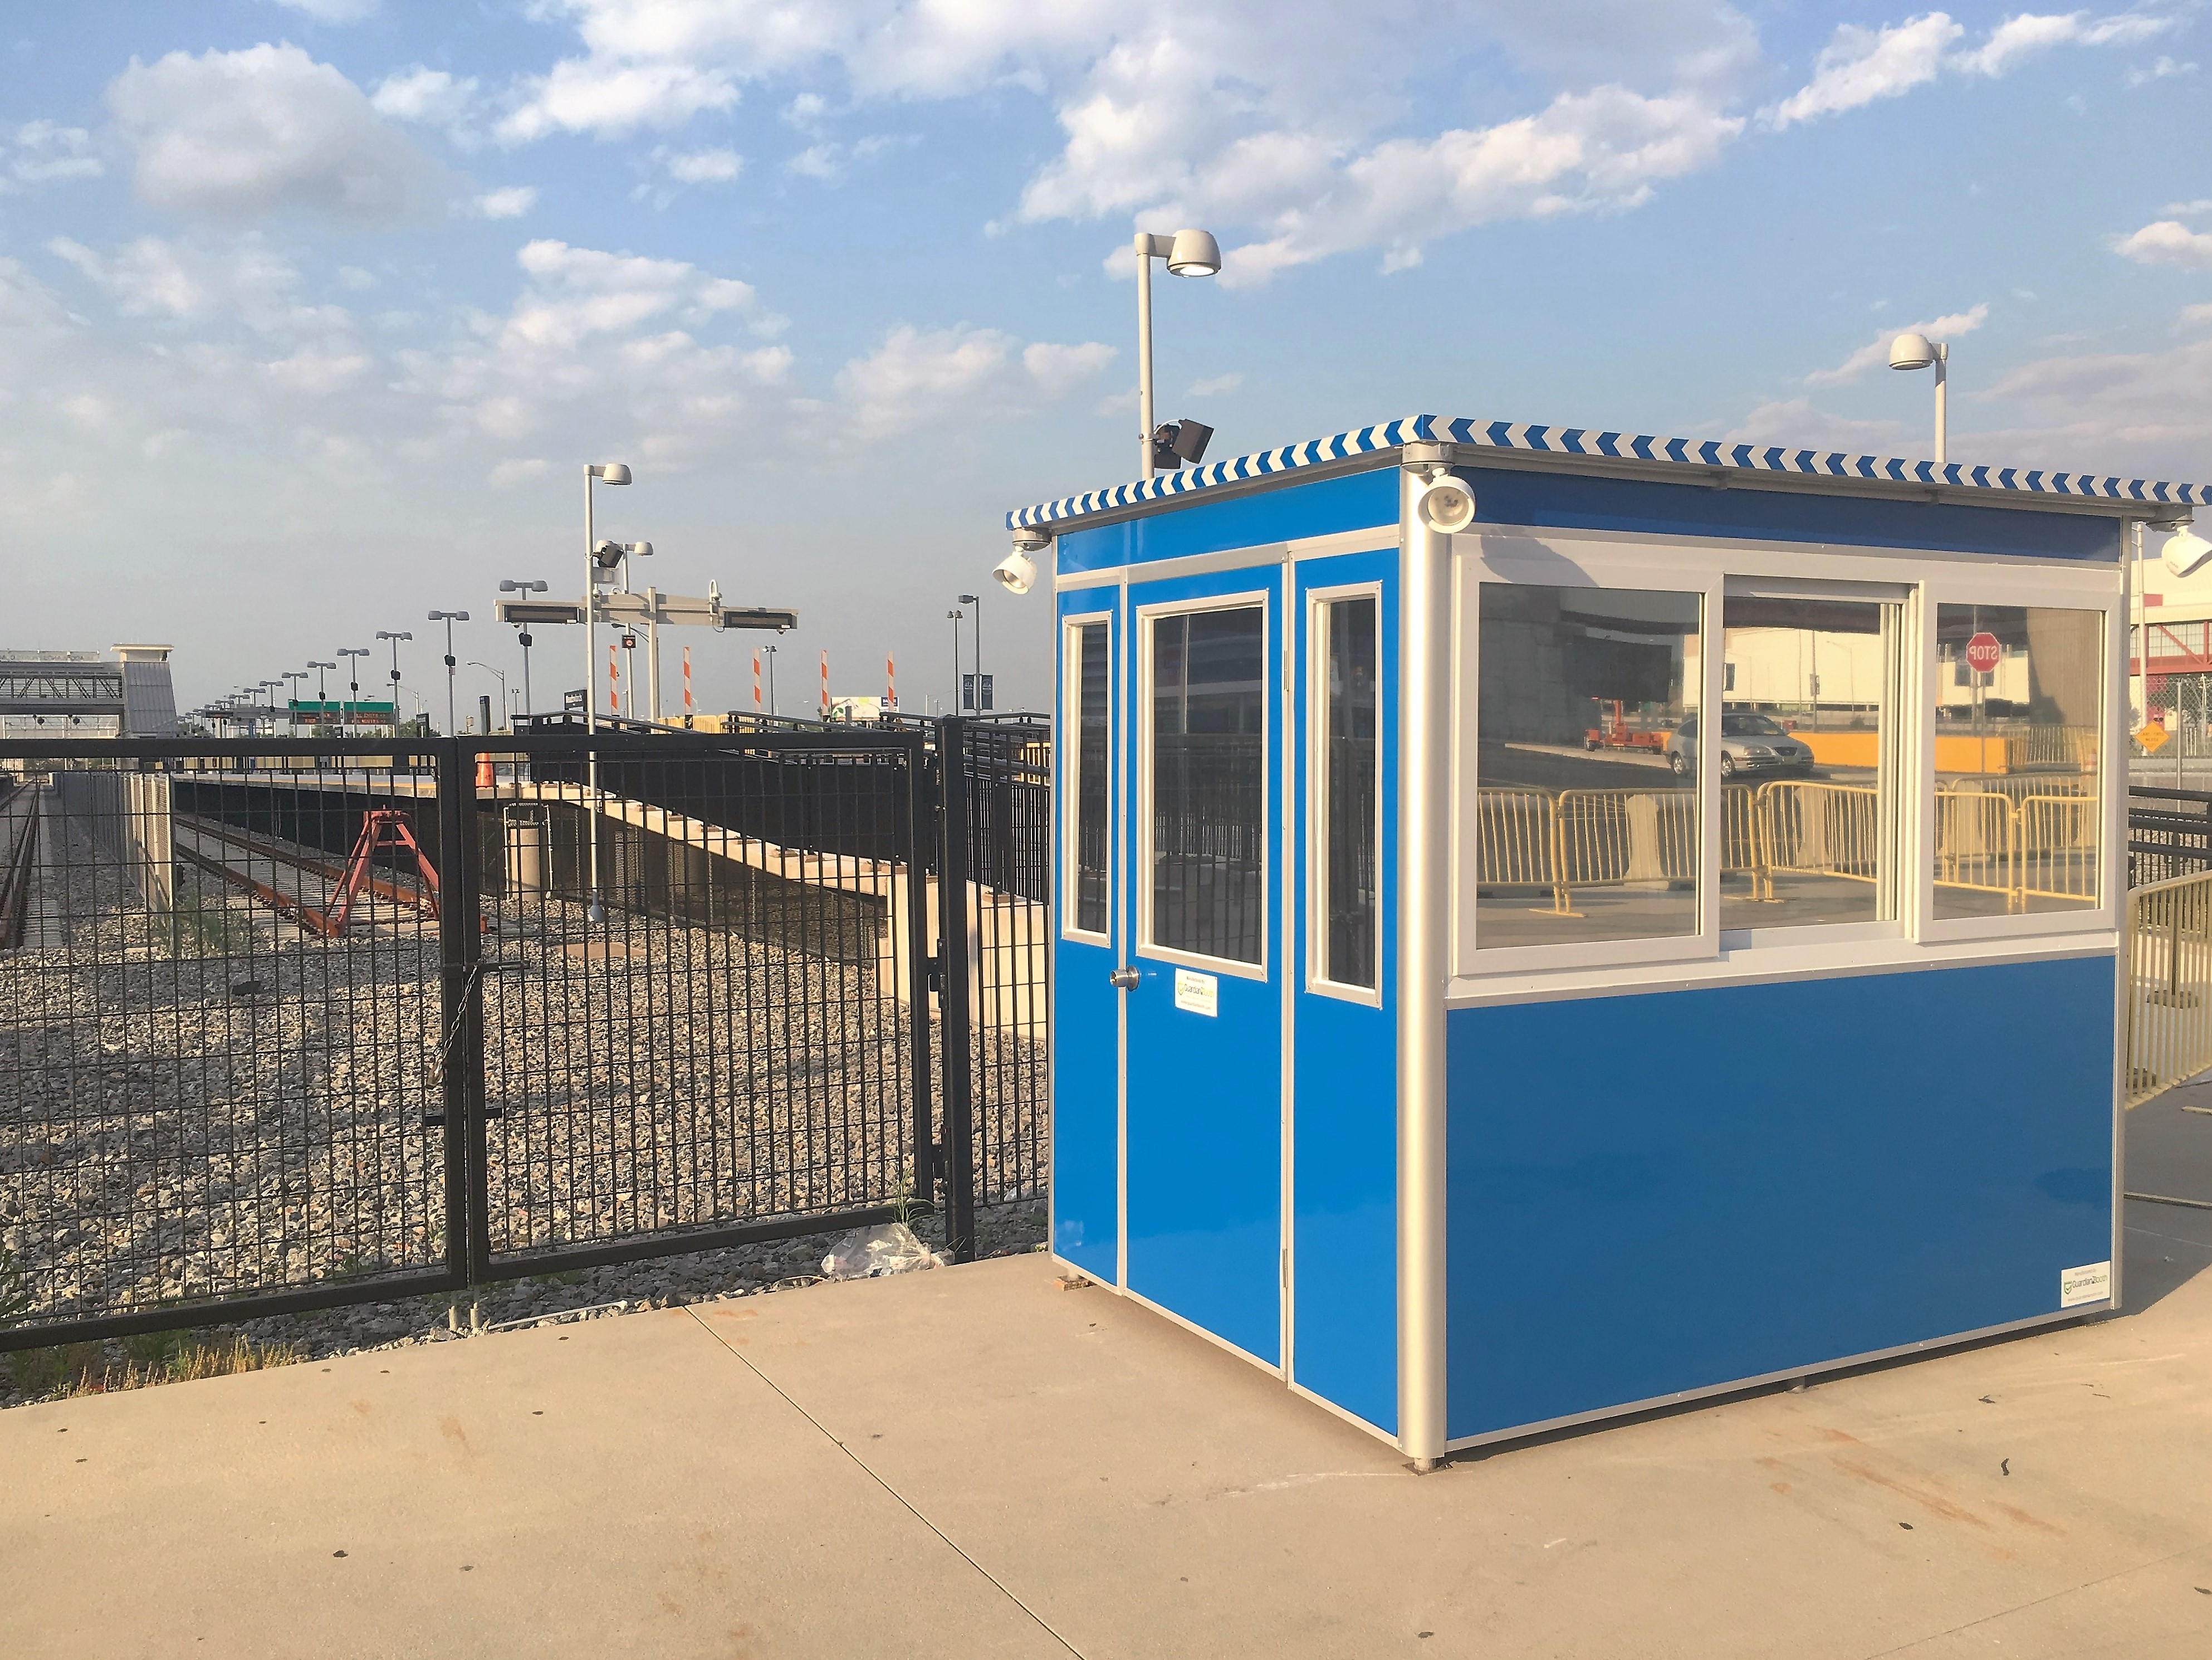 6x8 Security Guard Booth in Rutherford, NJ outside the Stadium with Built-in AC, Baseboard Heaters, and Breaker Panel Box